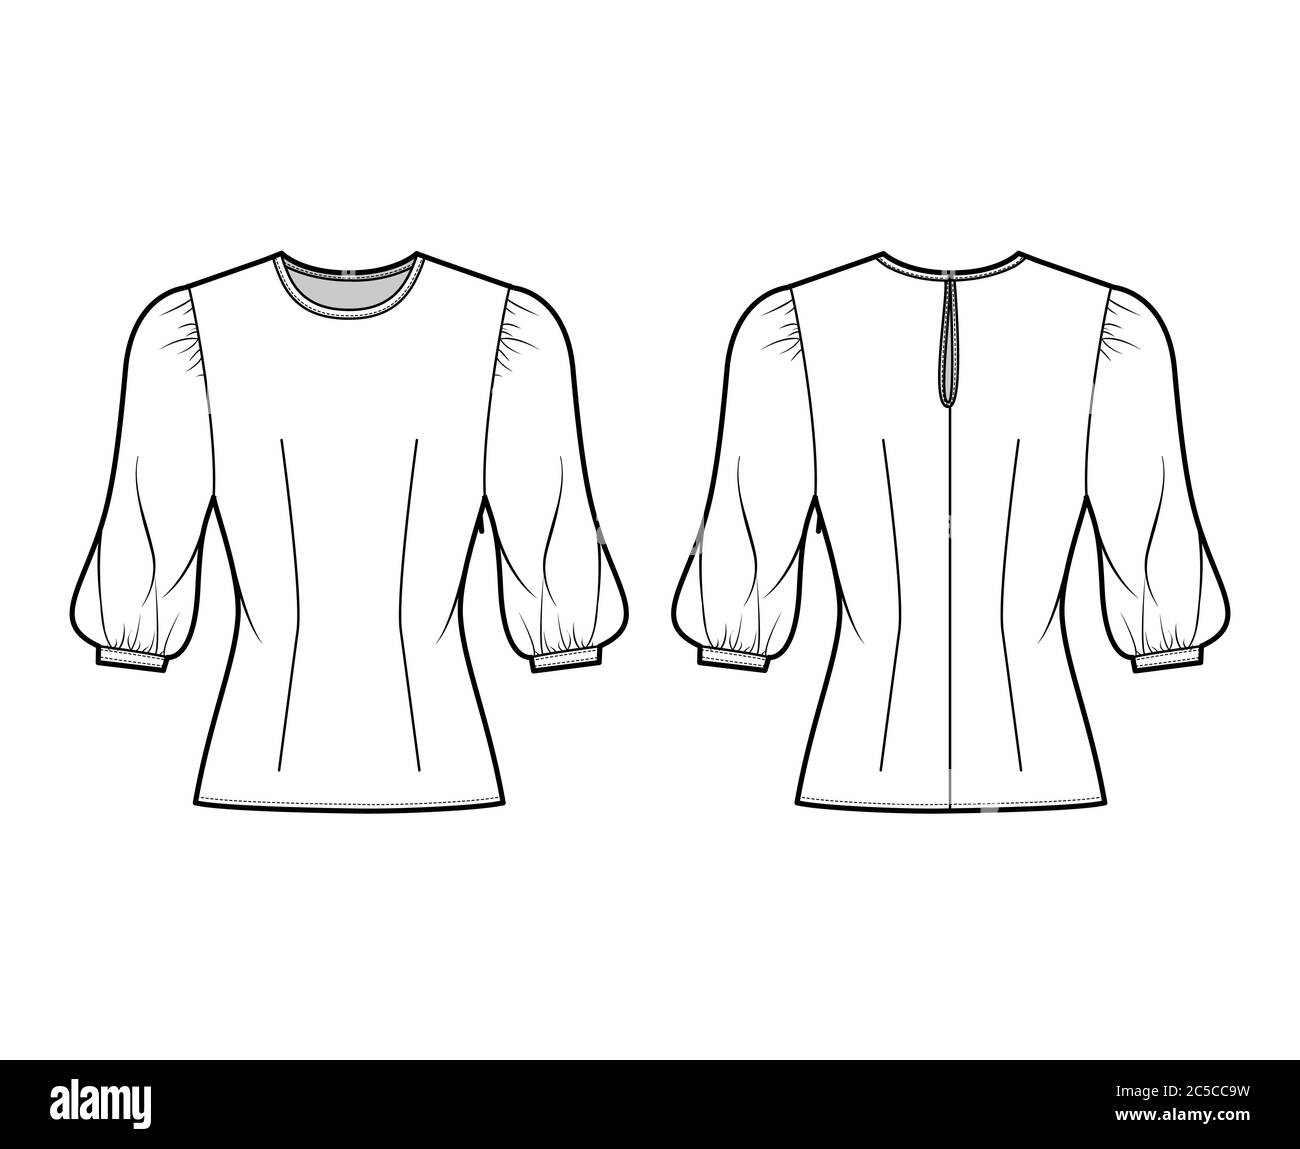 Blouse technical fashion illustration with round neckline, puffy mutton ...